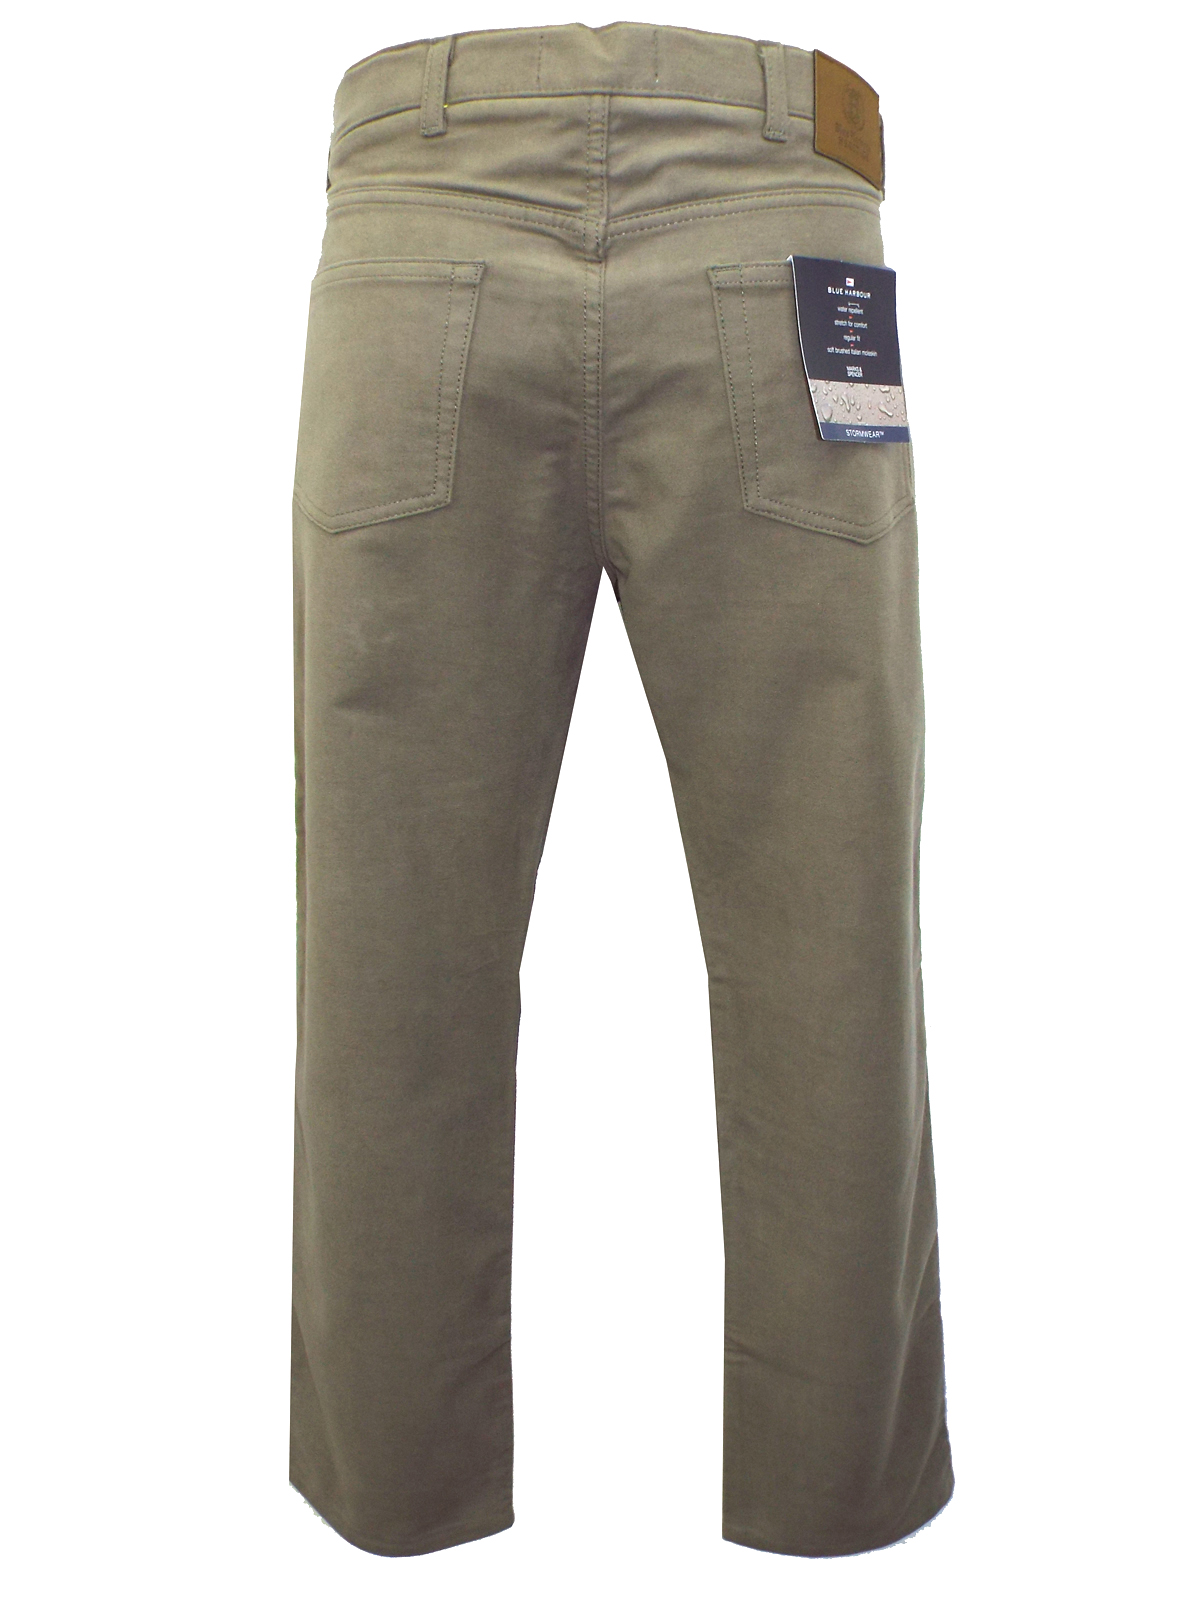 Marks and Spencer - - M&5 LIGHT-BROWN Regular Fit Chinos with Stormwear ...